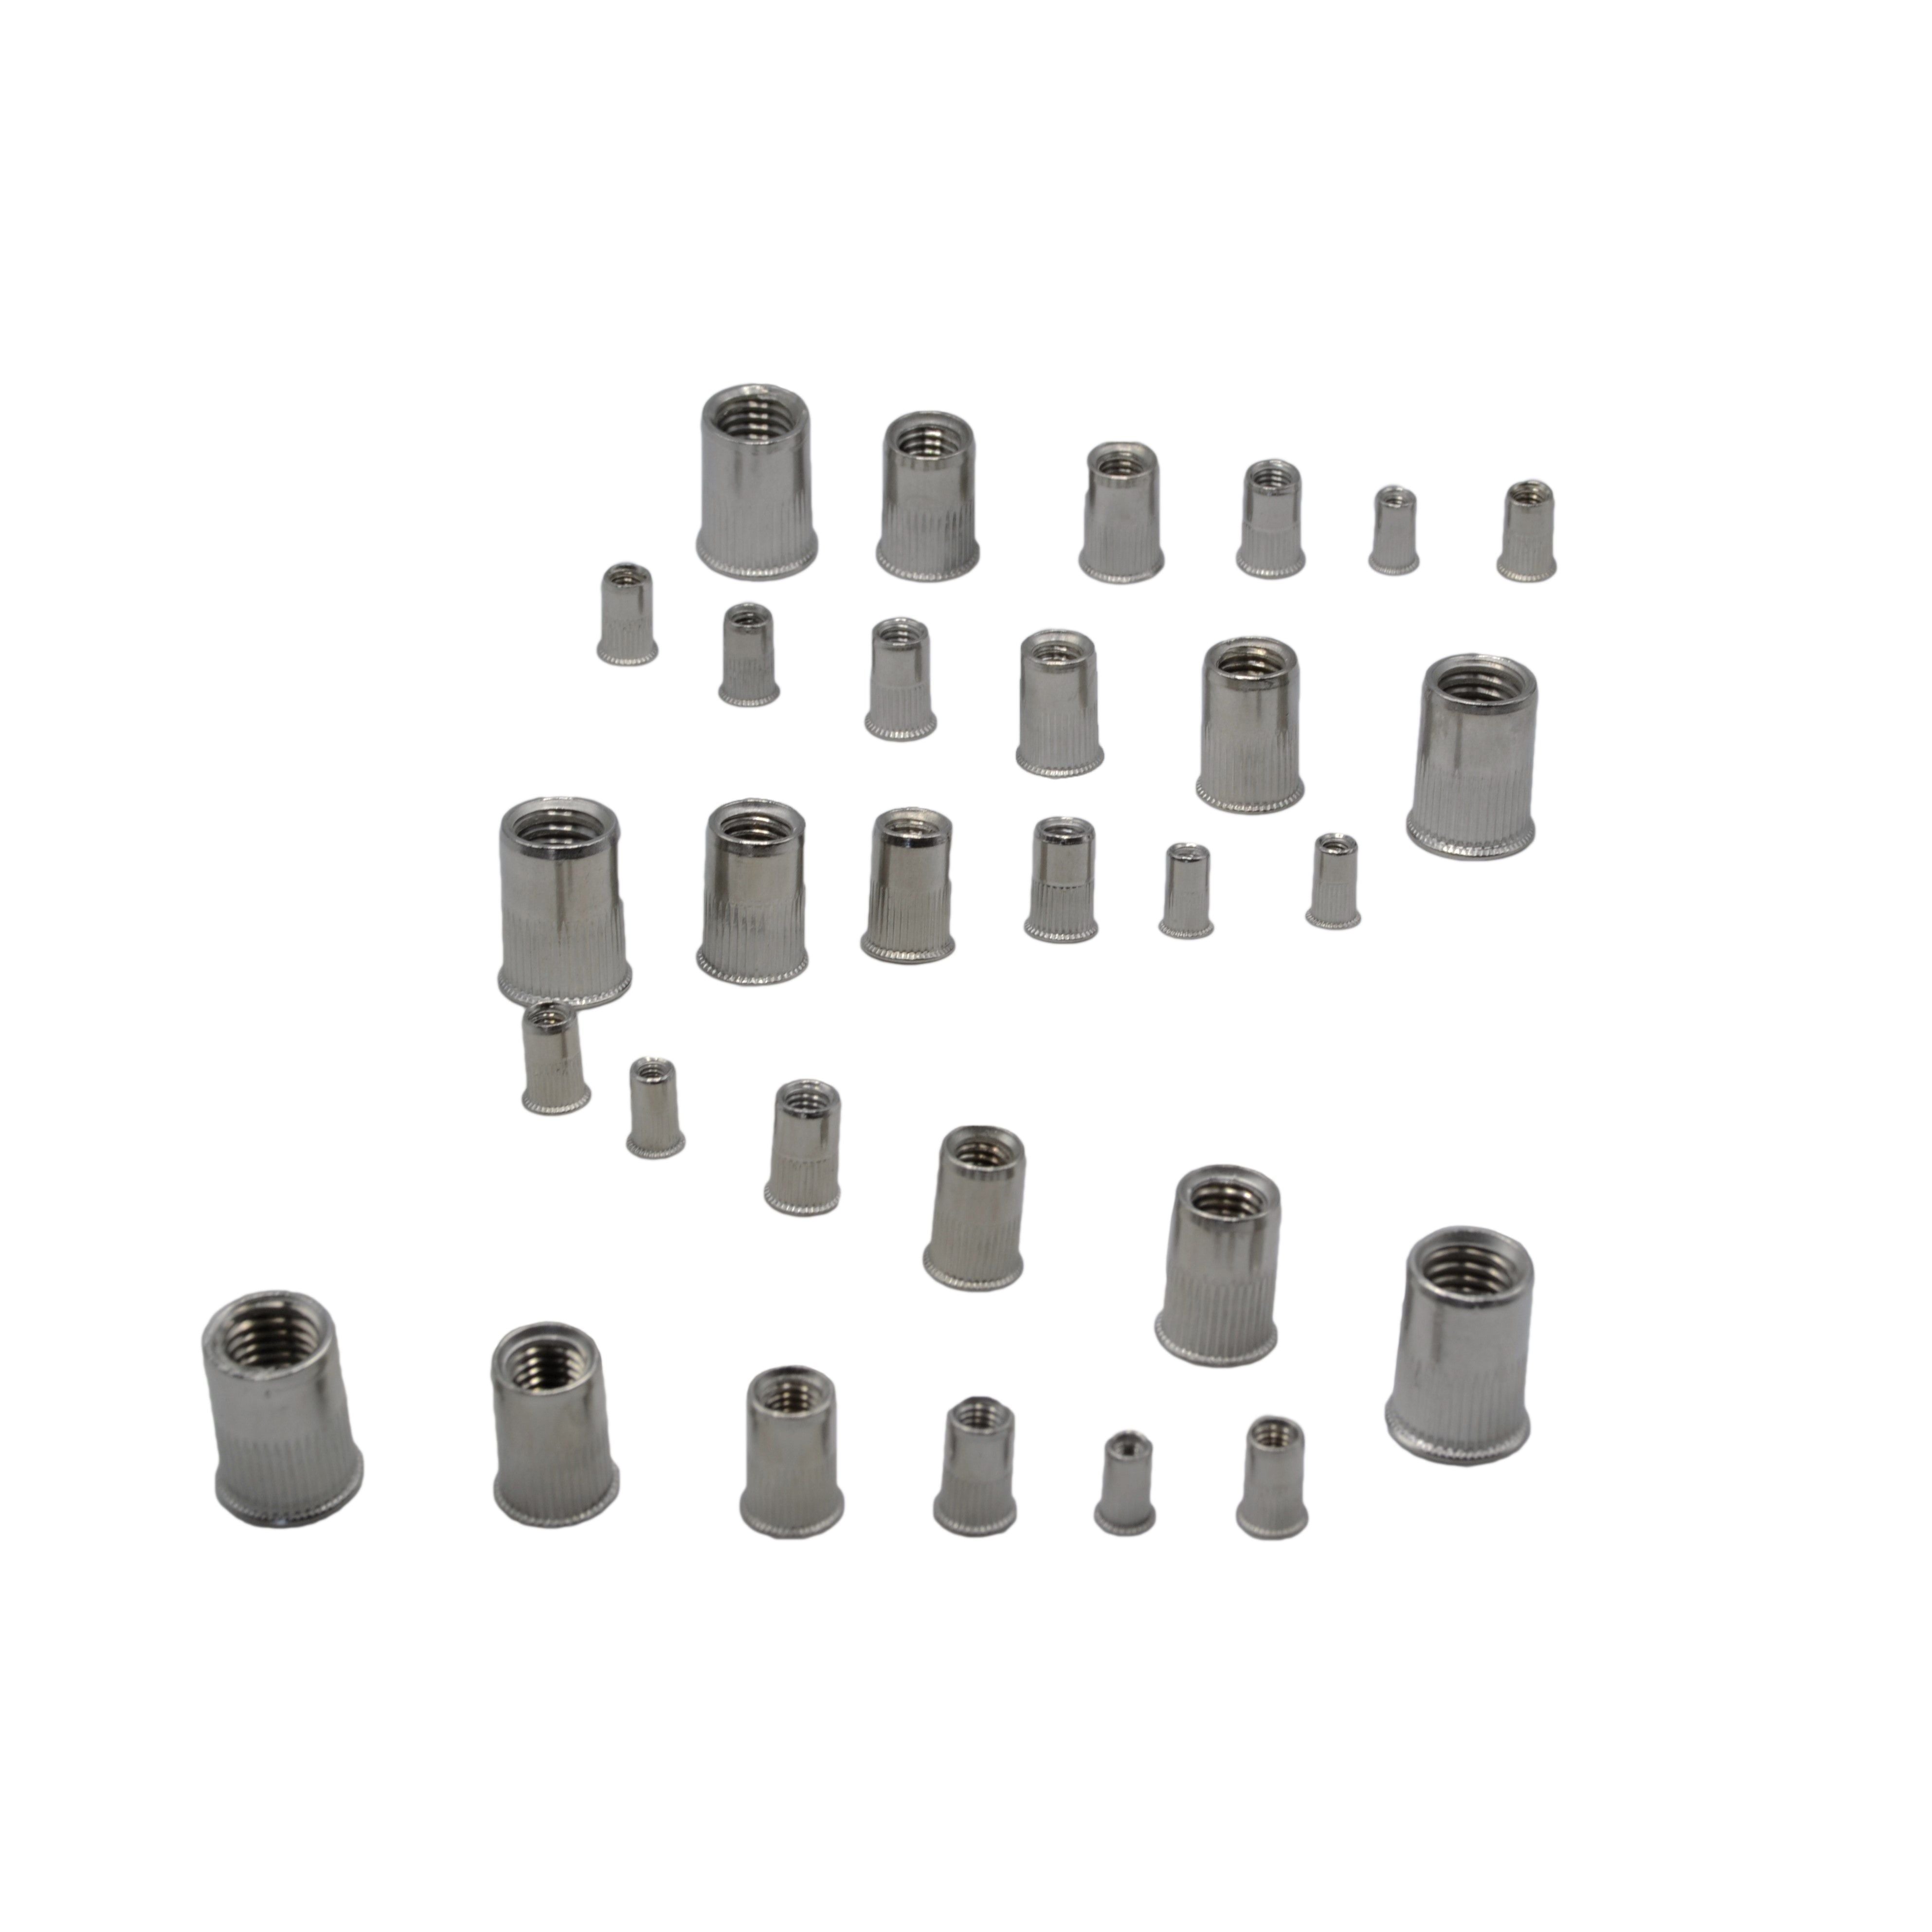 304 Small Flange Stainless Steel Metric Nutserts 120 pc grab kit assortment